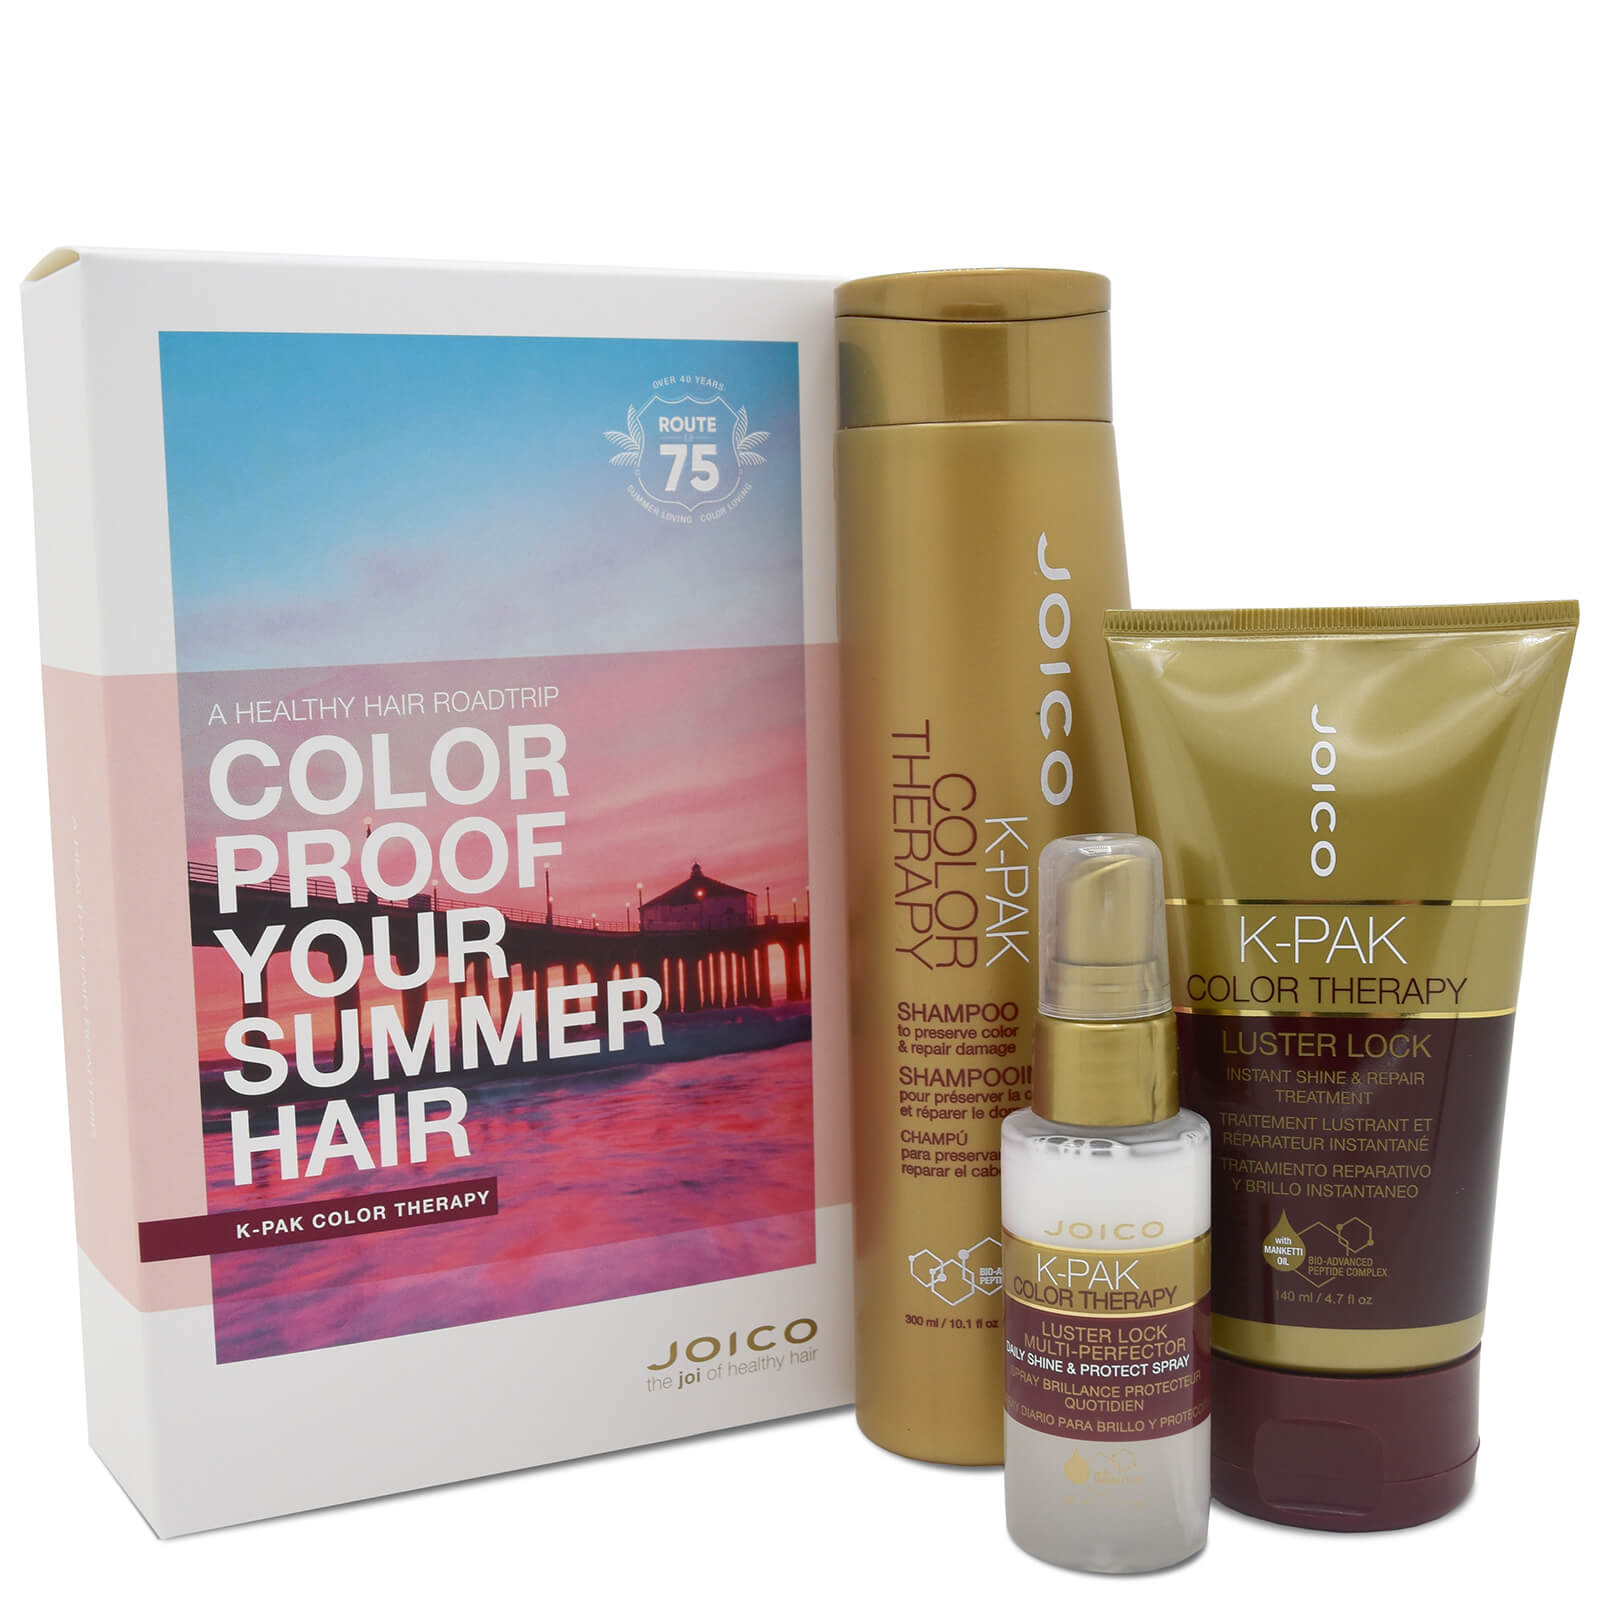 Joico K-Pak Color Therapy Color Proof Your Summer Hair Trio Pack